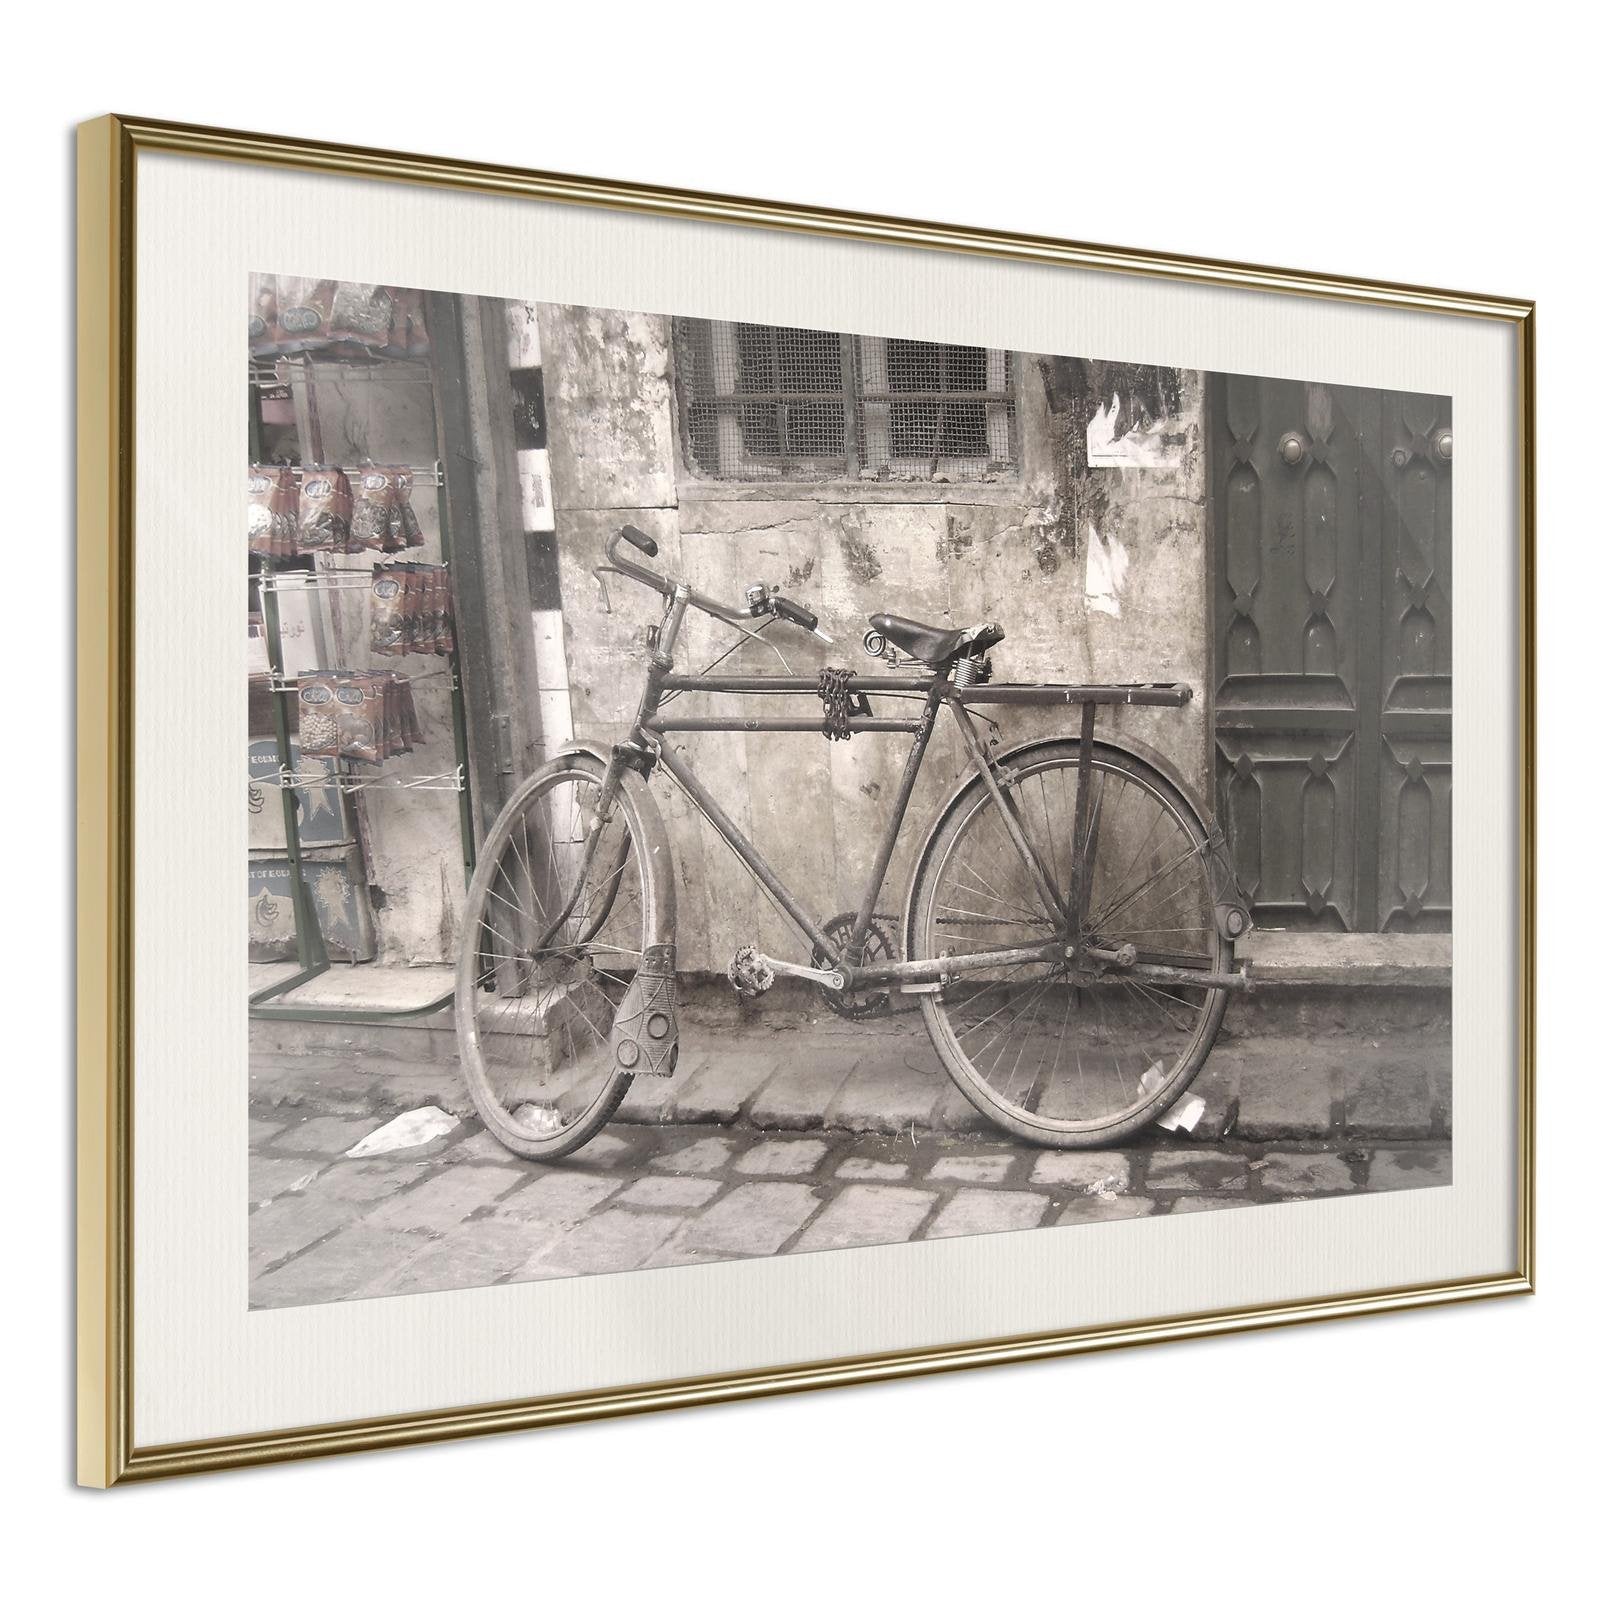 Inramad Poster / Tavla - Old Bicycle-Poster Inramad-Artgeist-30x20-Guldram med passepartout-peaceofhome.se